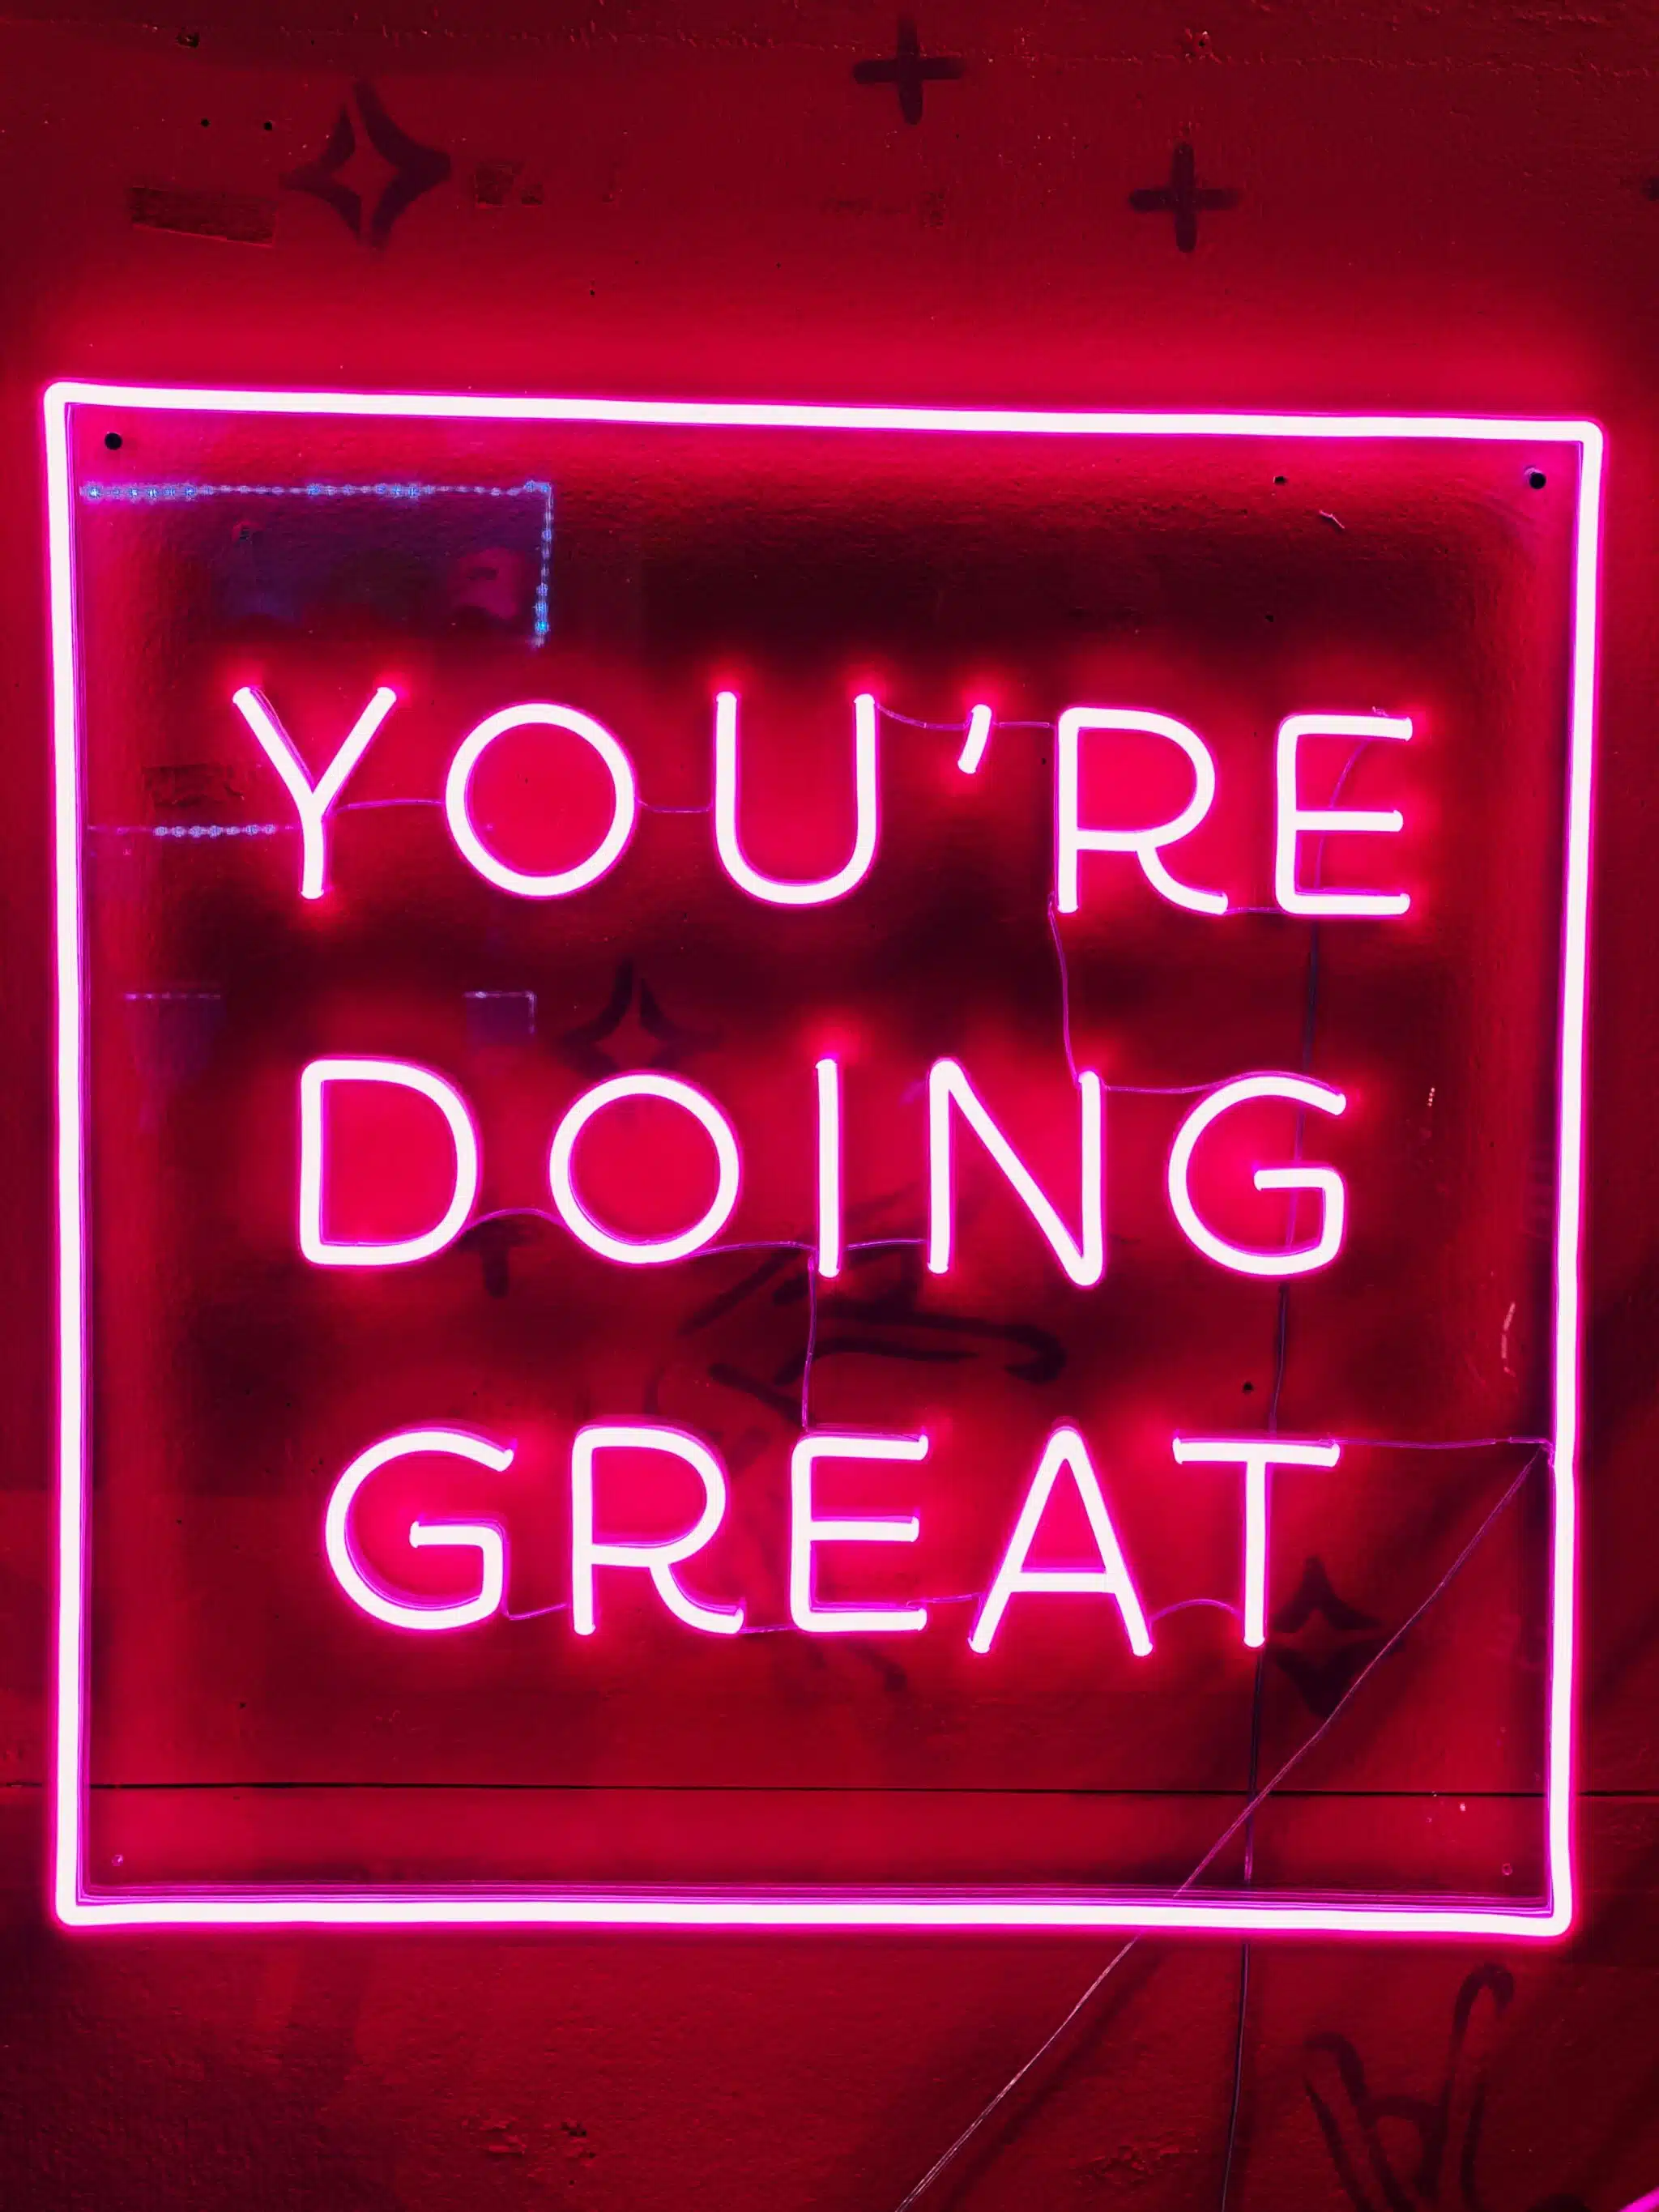 Don't forget to tell people, "you're doing great!"